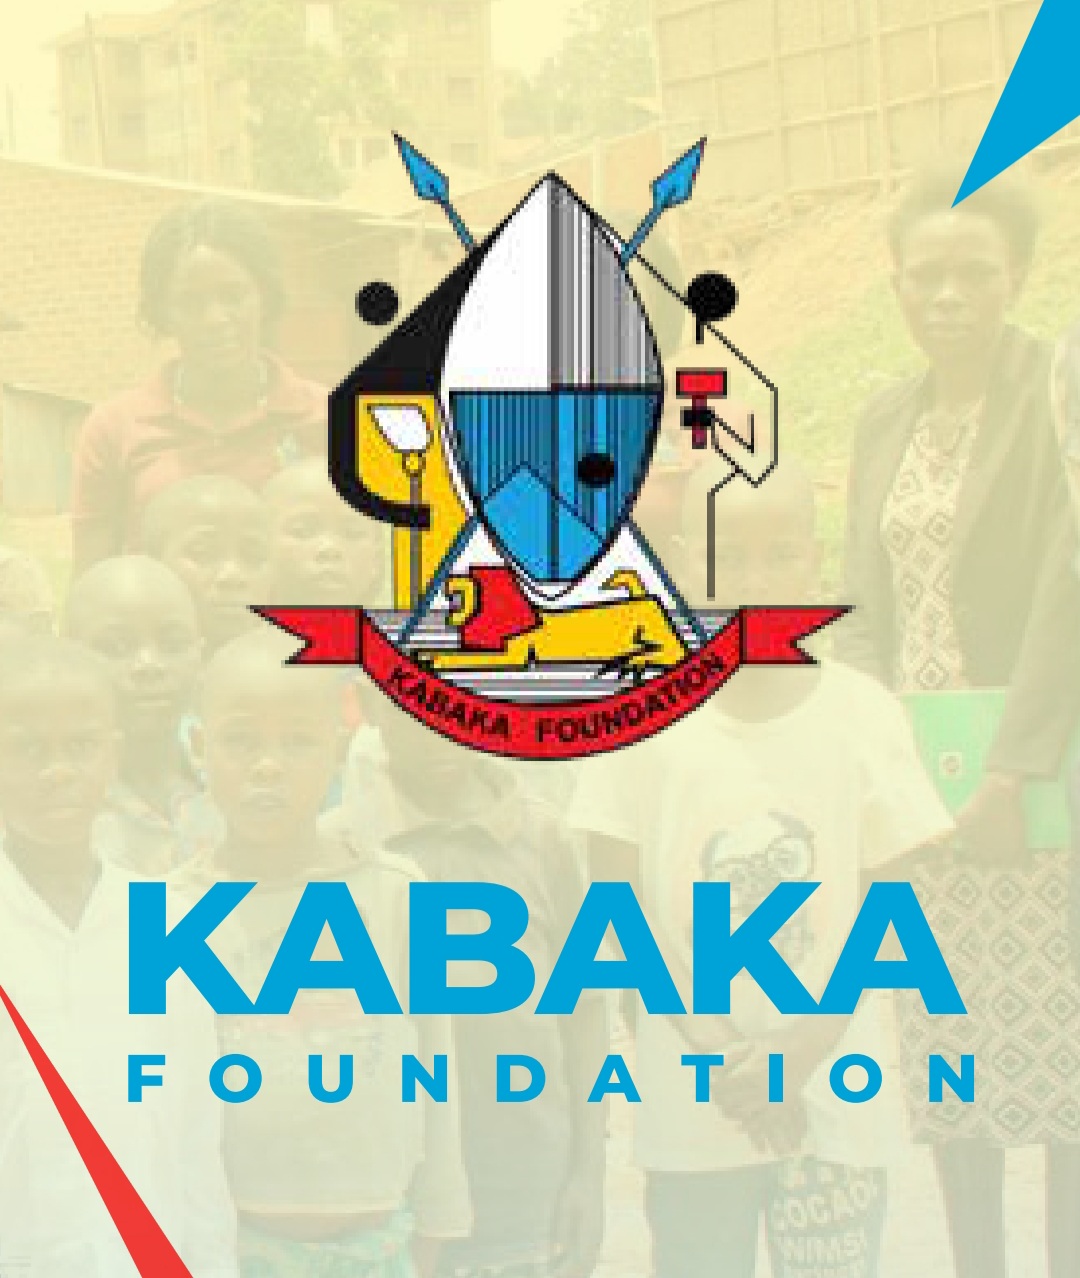 Charity Auction for the Kabaka Foundation